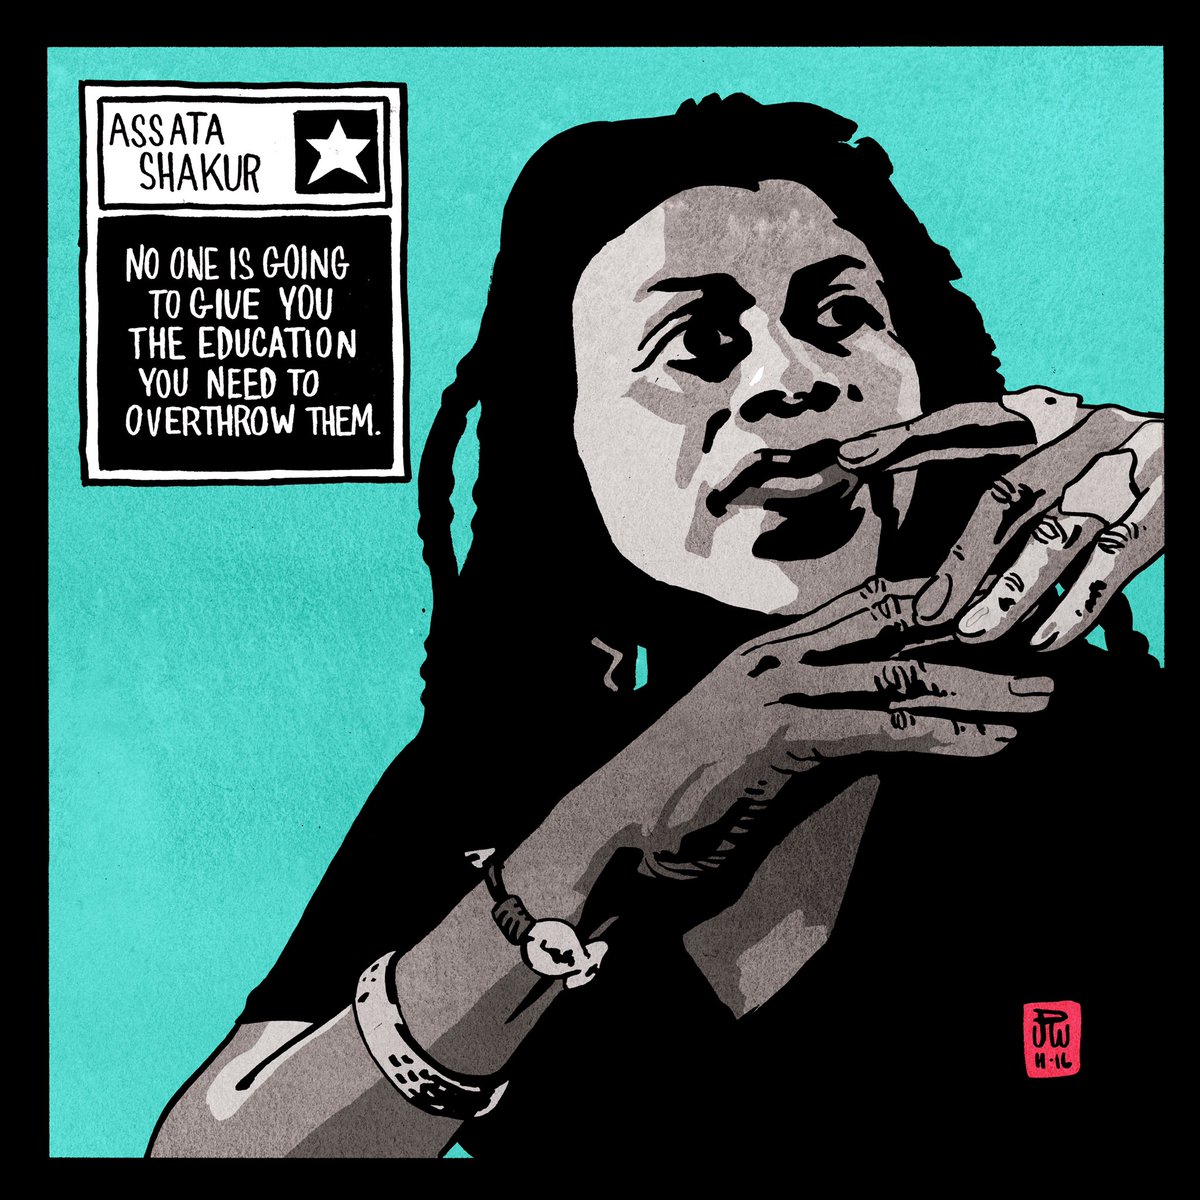 #AssataShakur #revolutionary #BlackLiberationArmy  #FBImostwanted #BlackHistory #quotes

(Most of these are available in Black History in its Own Words from @imagecomics) ...this was another favorite of mine.